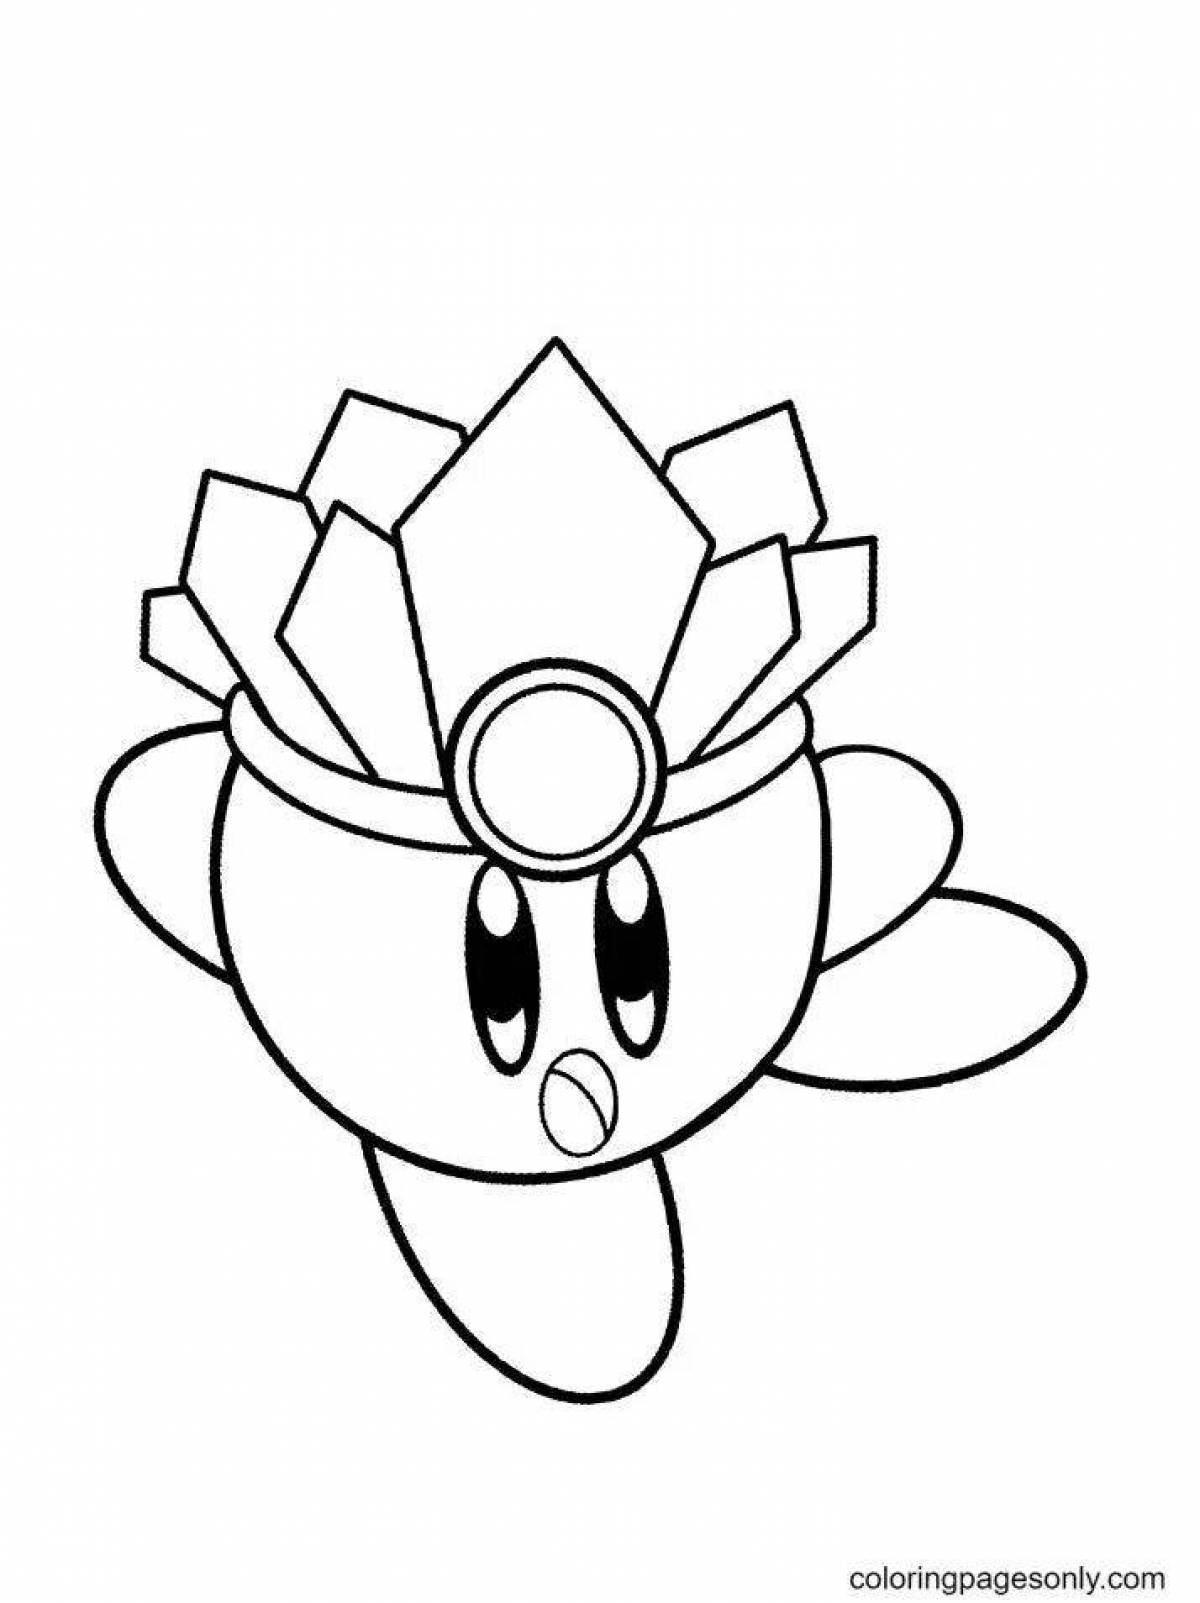 Live kirby coloring page